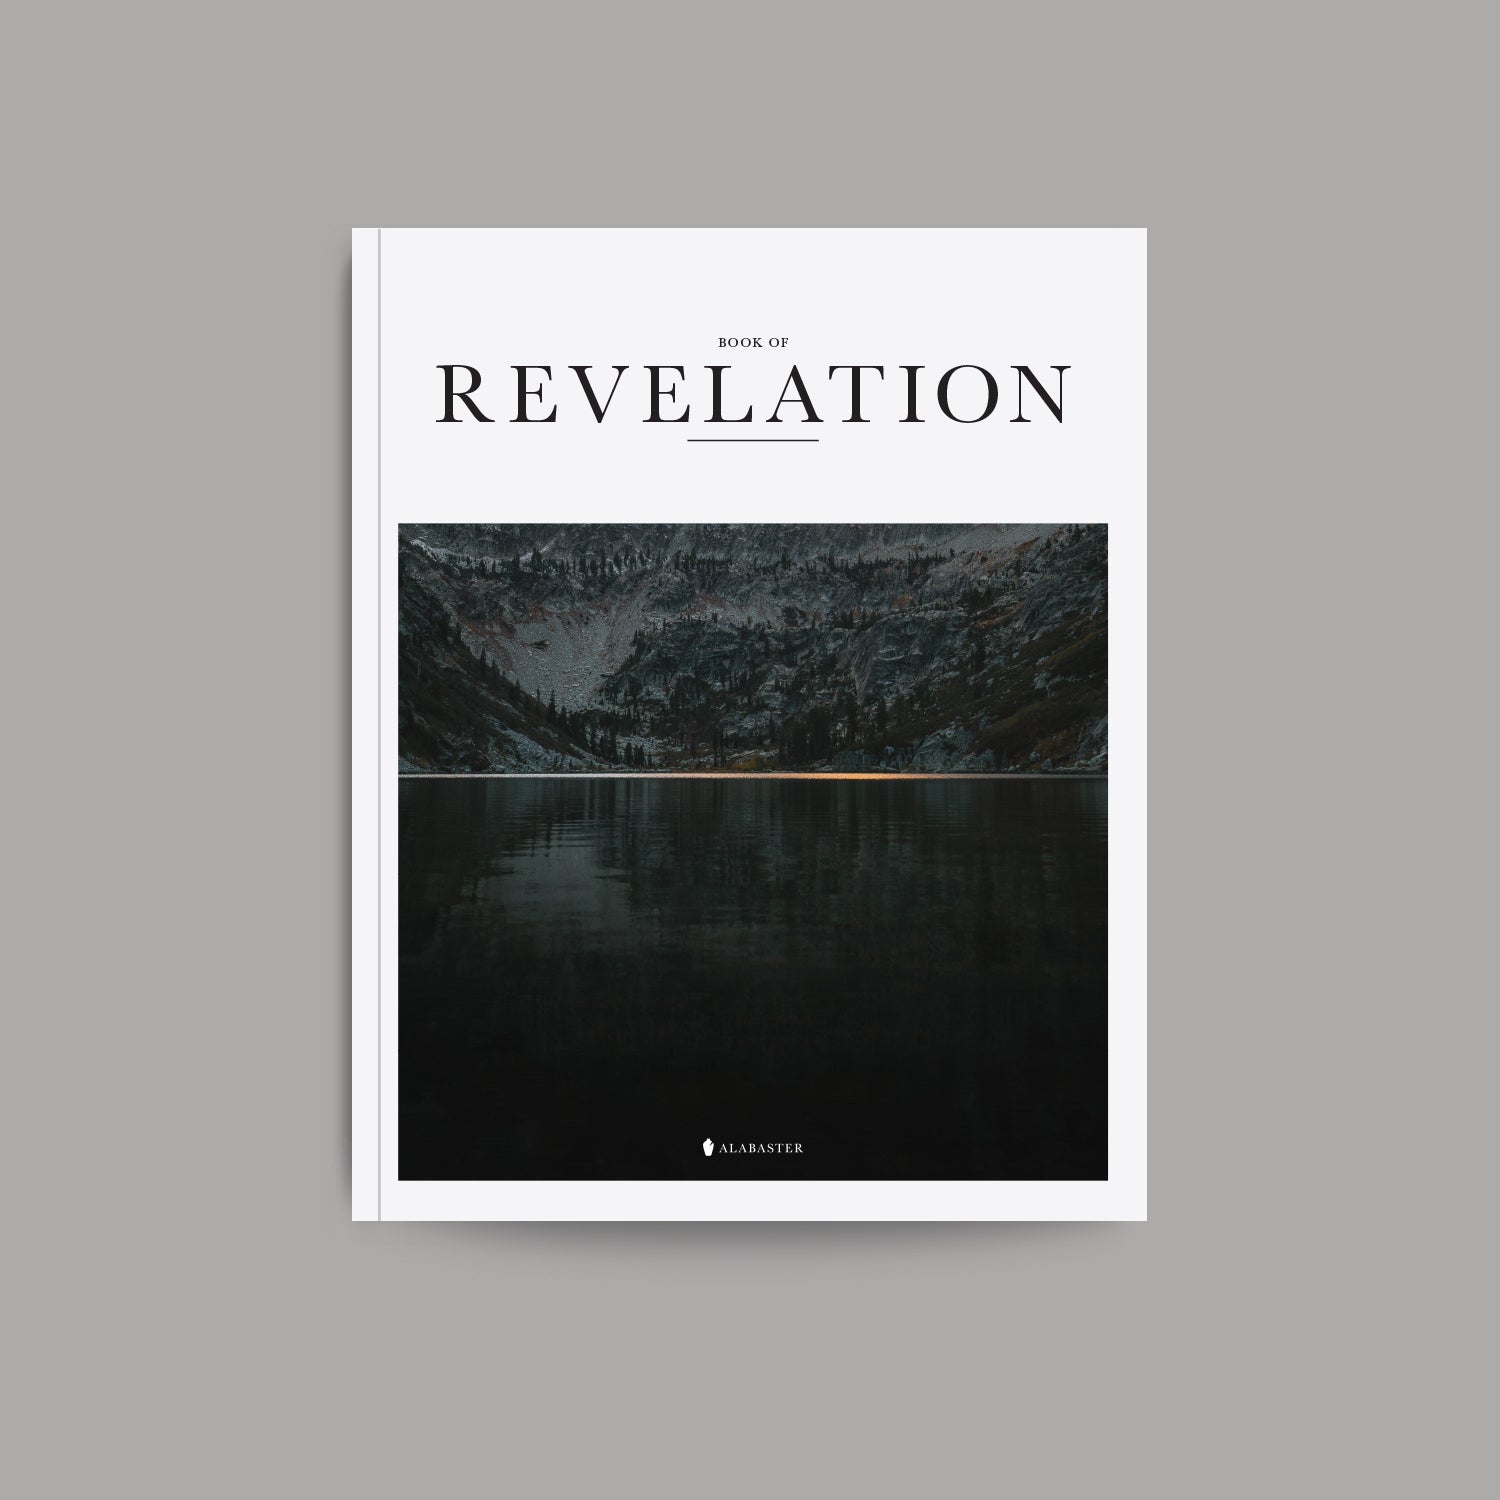 The Book of Revelation softcover